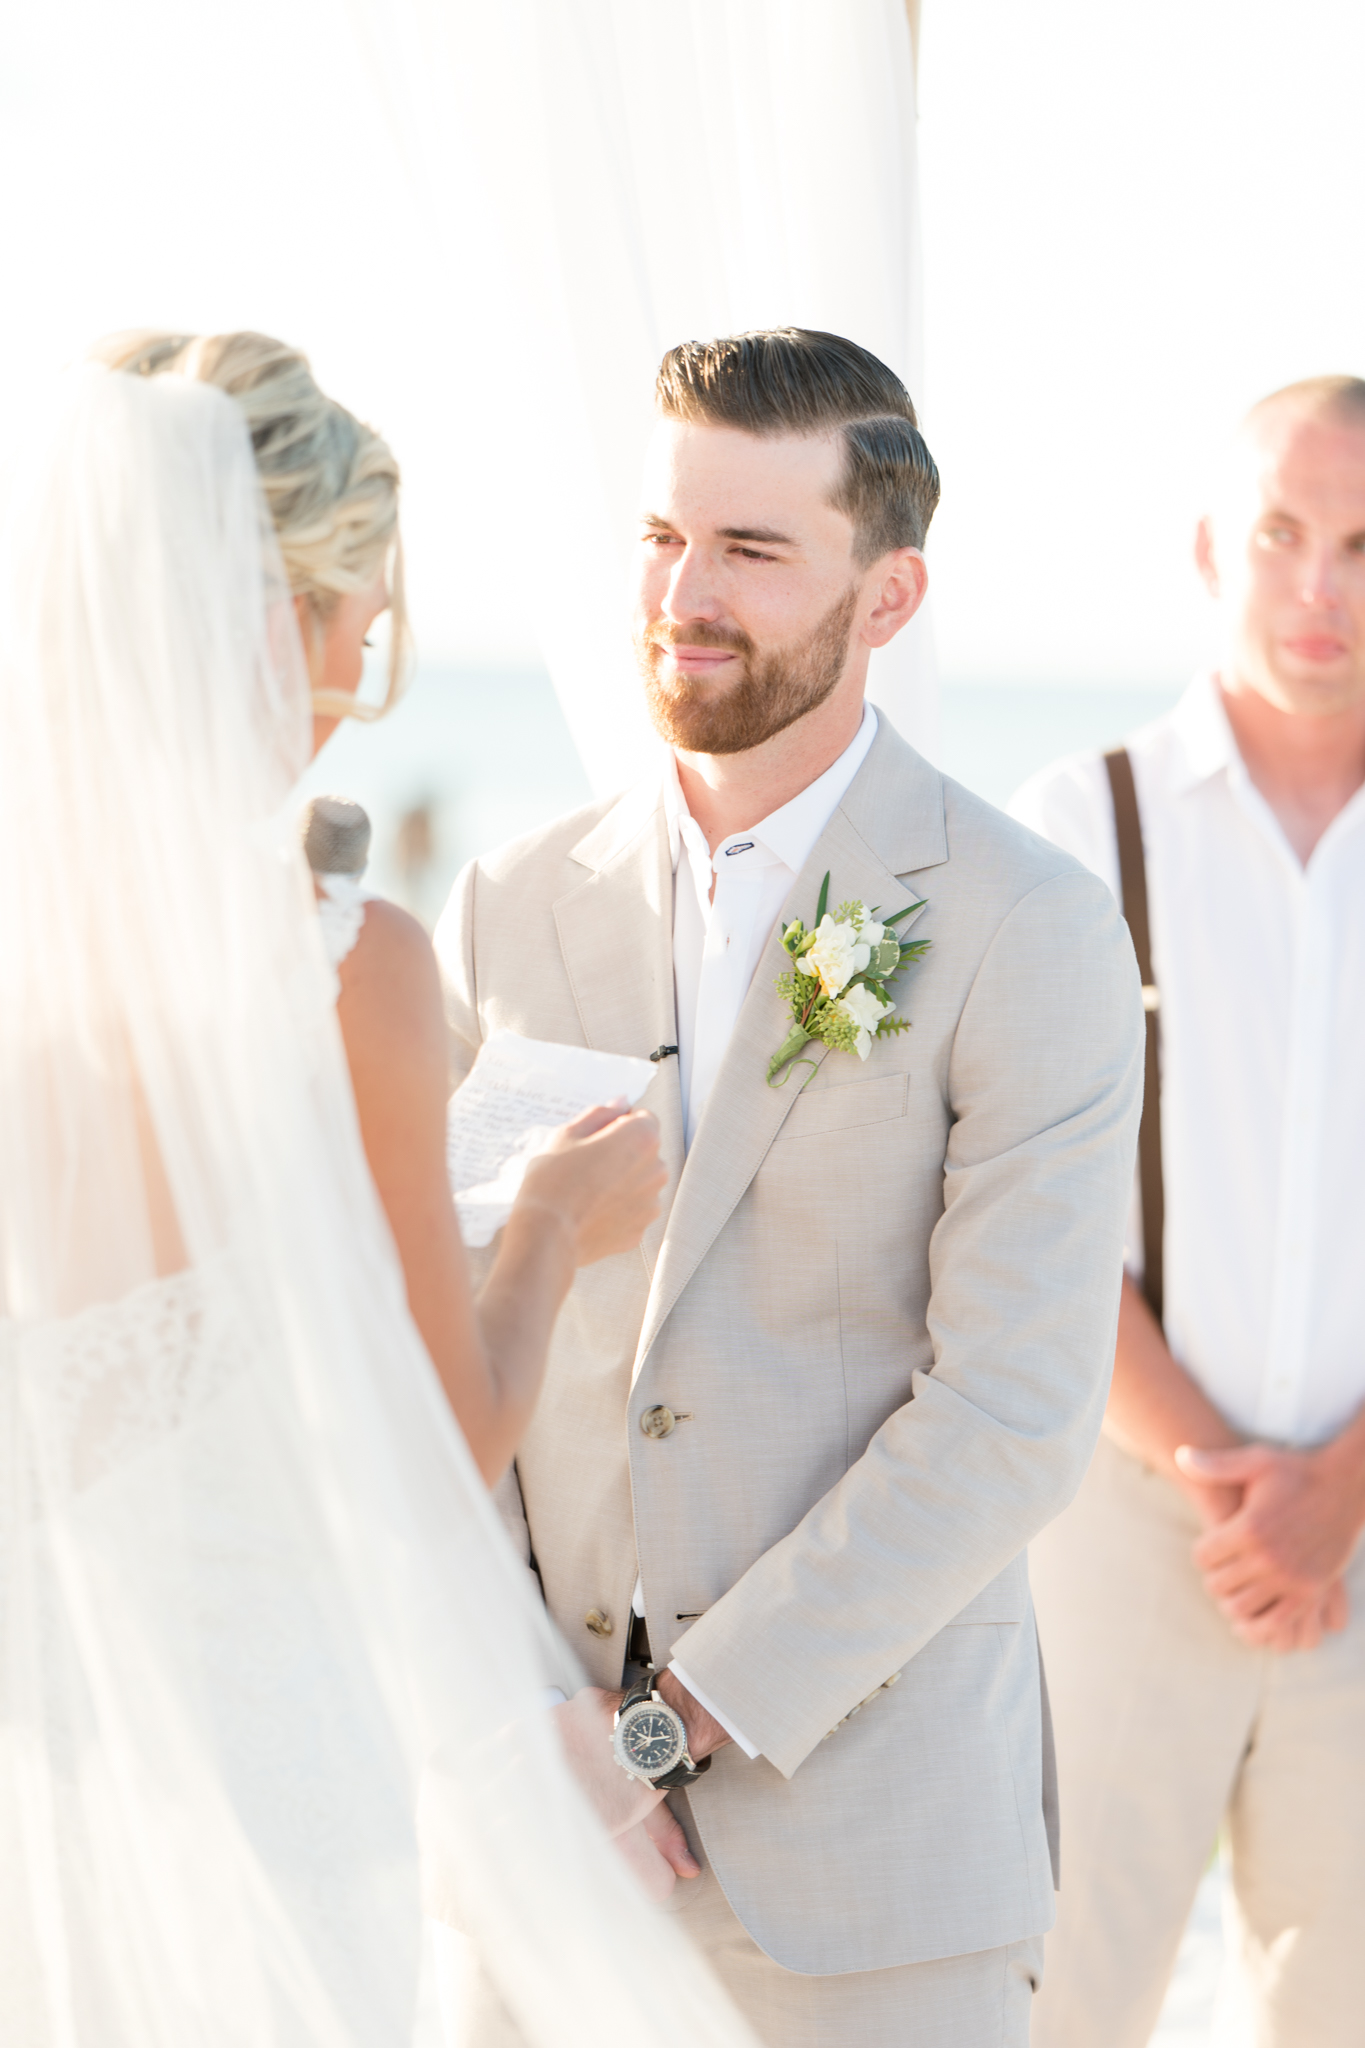 Groom smiles at bride during ceremony.